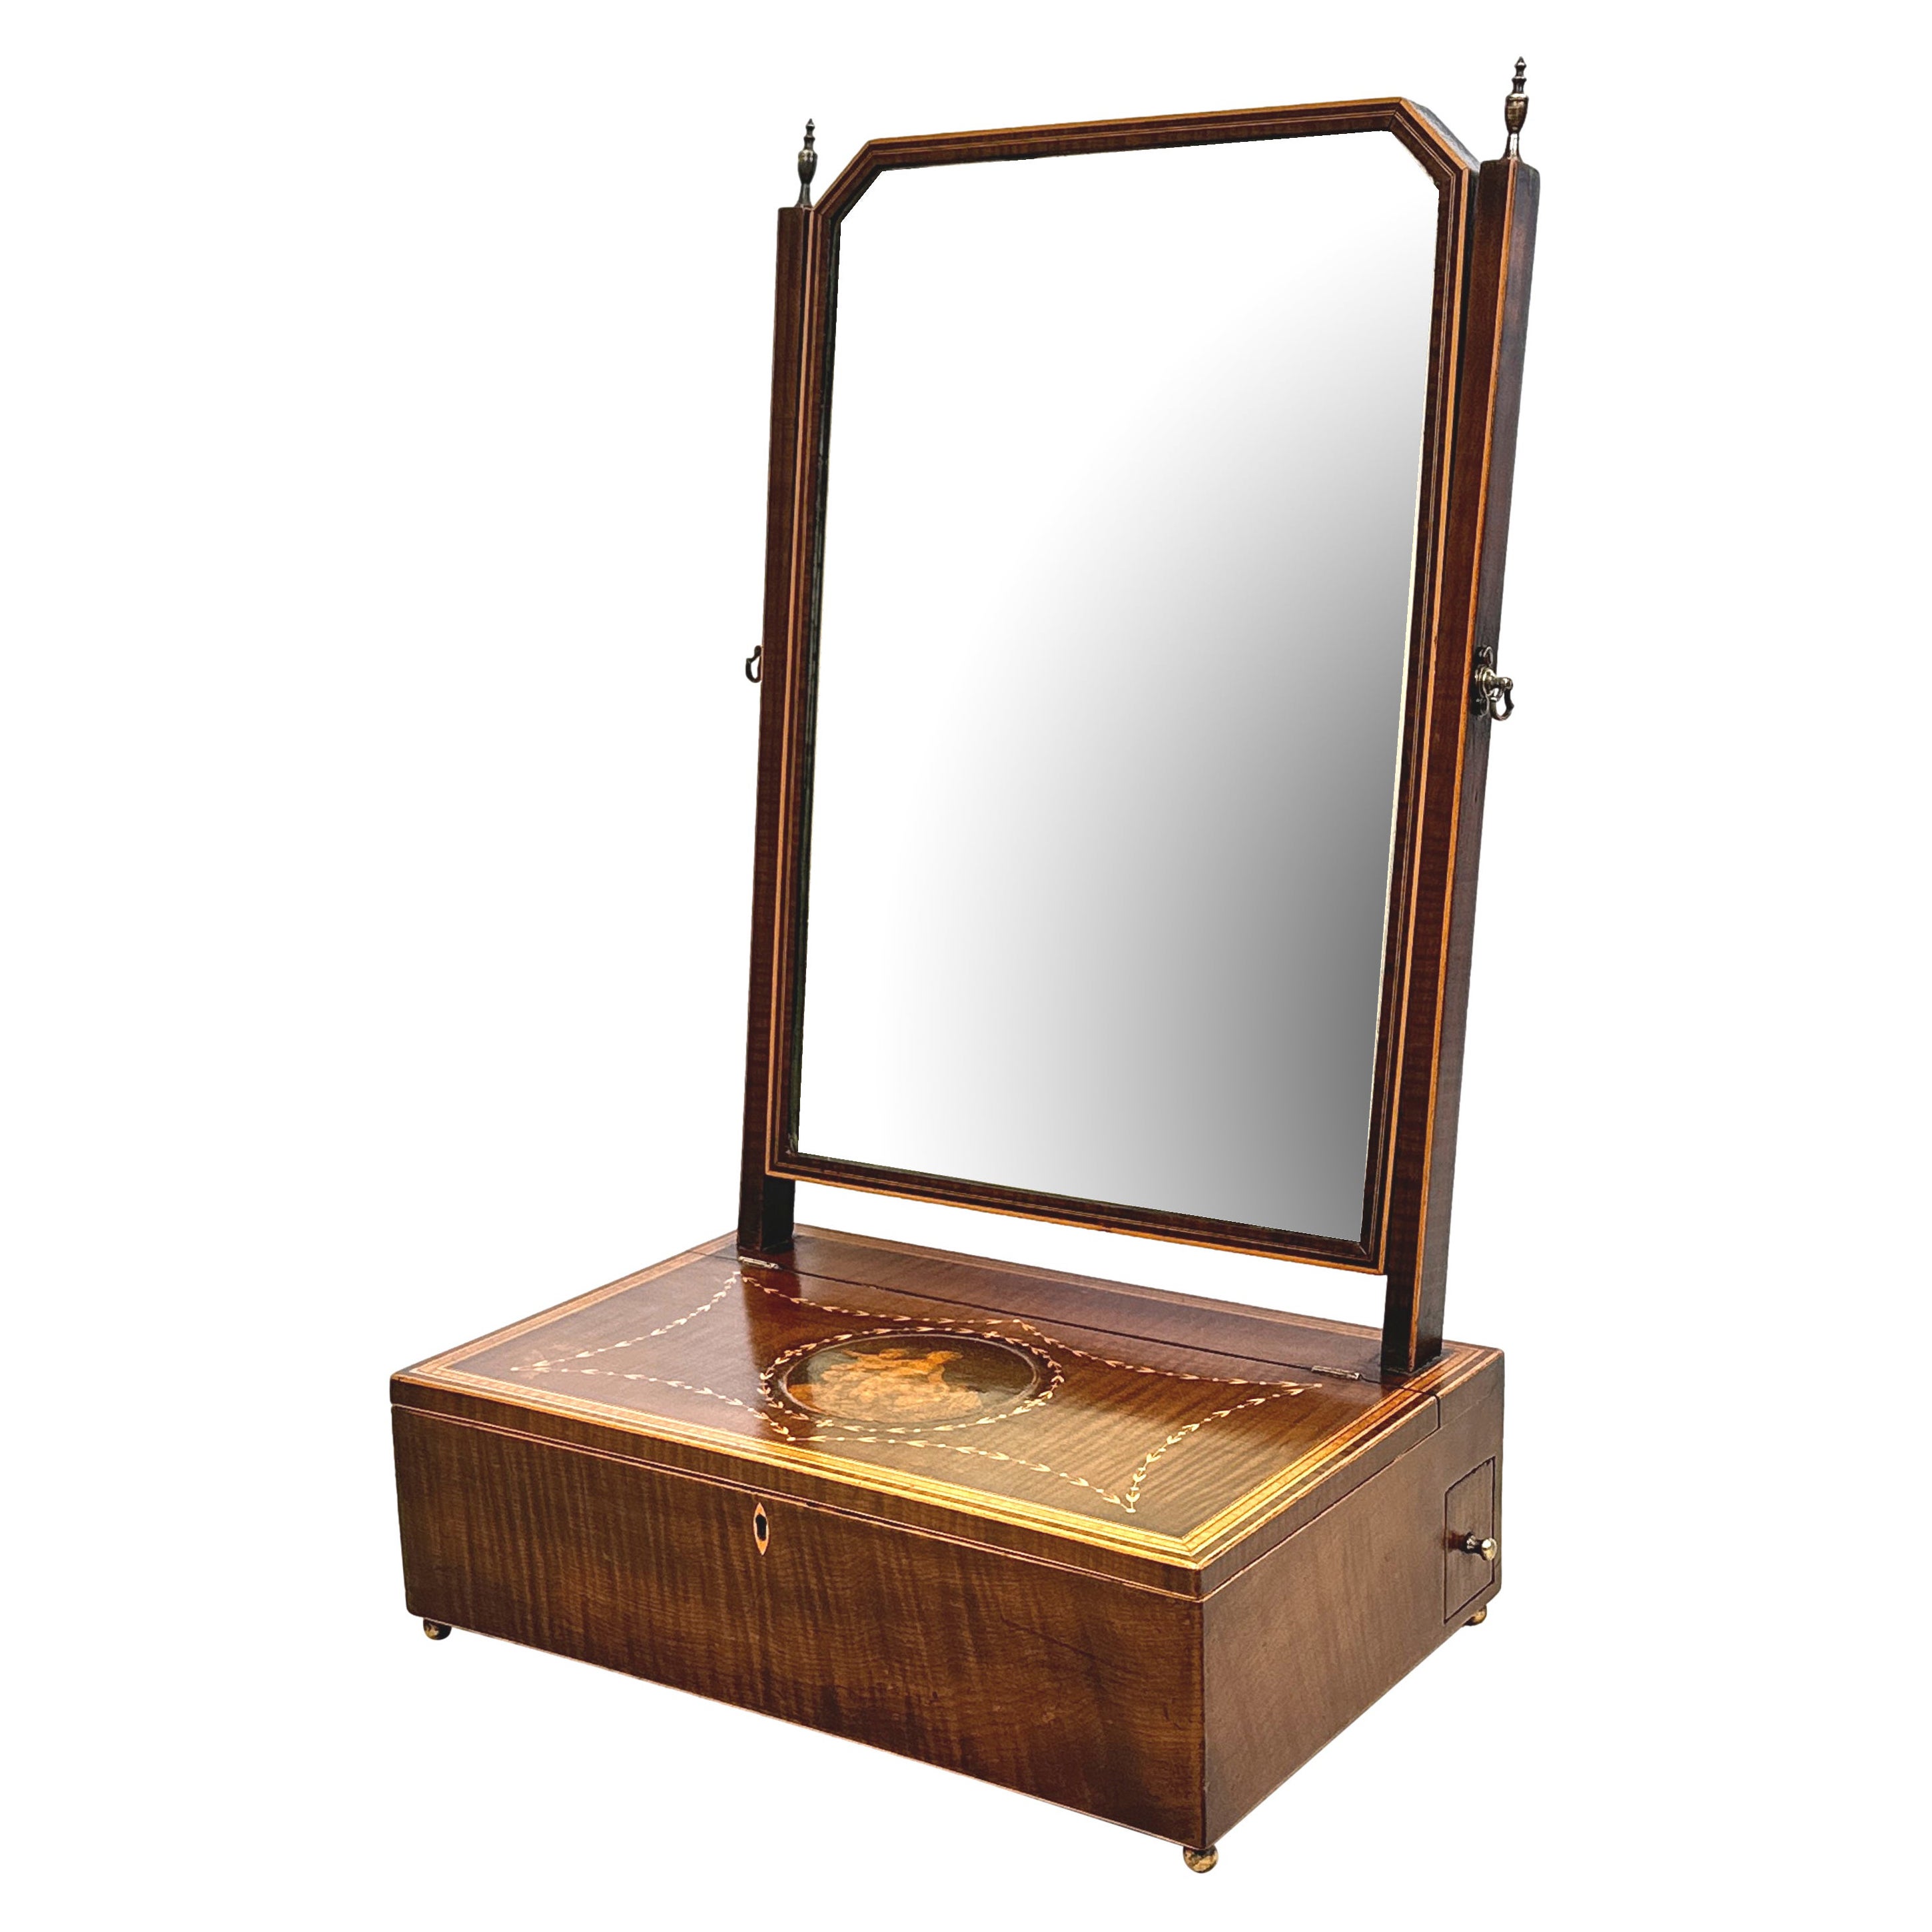 Rare 18th Century Harewood Dressing Table Mirror For Sale